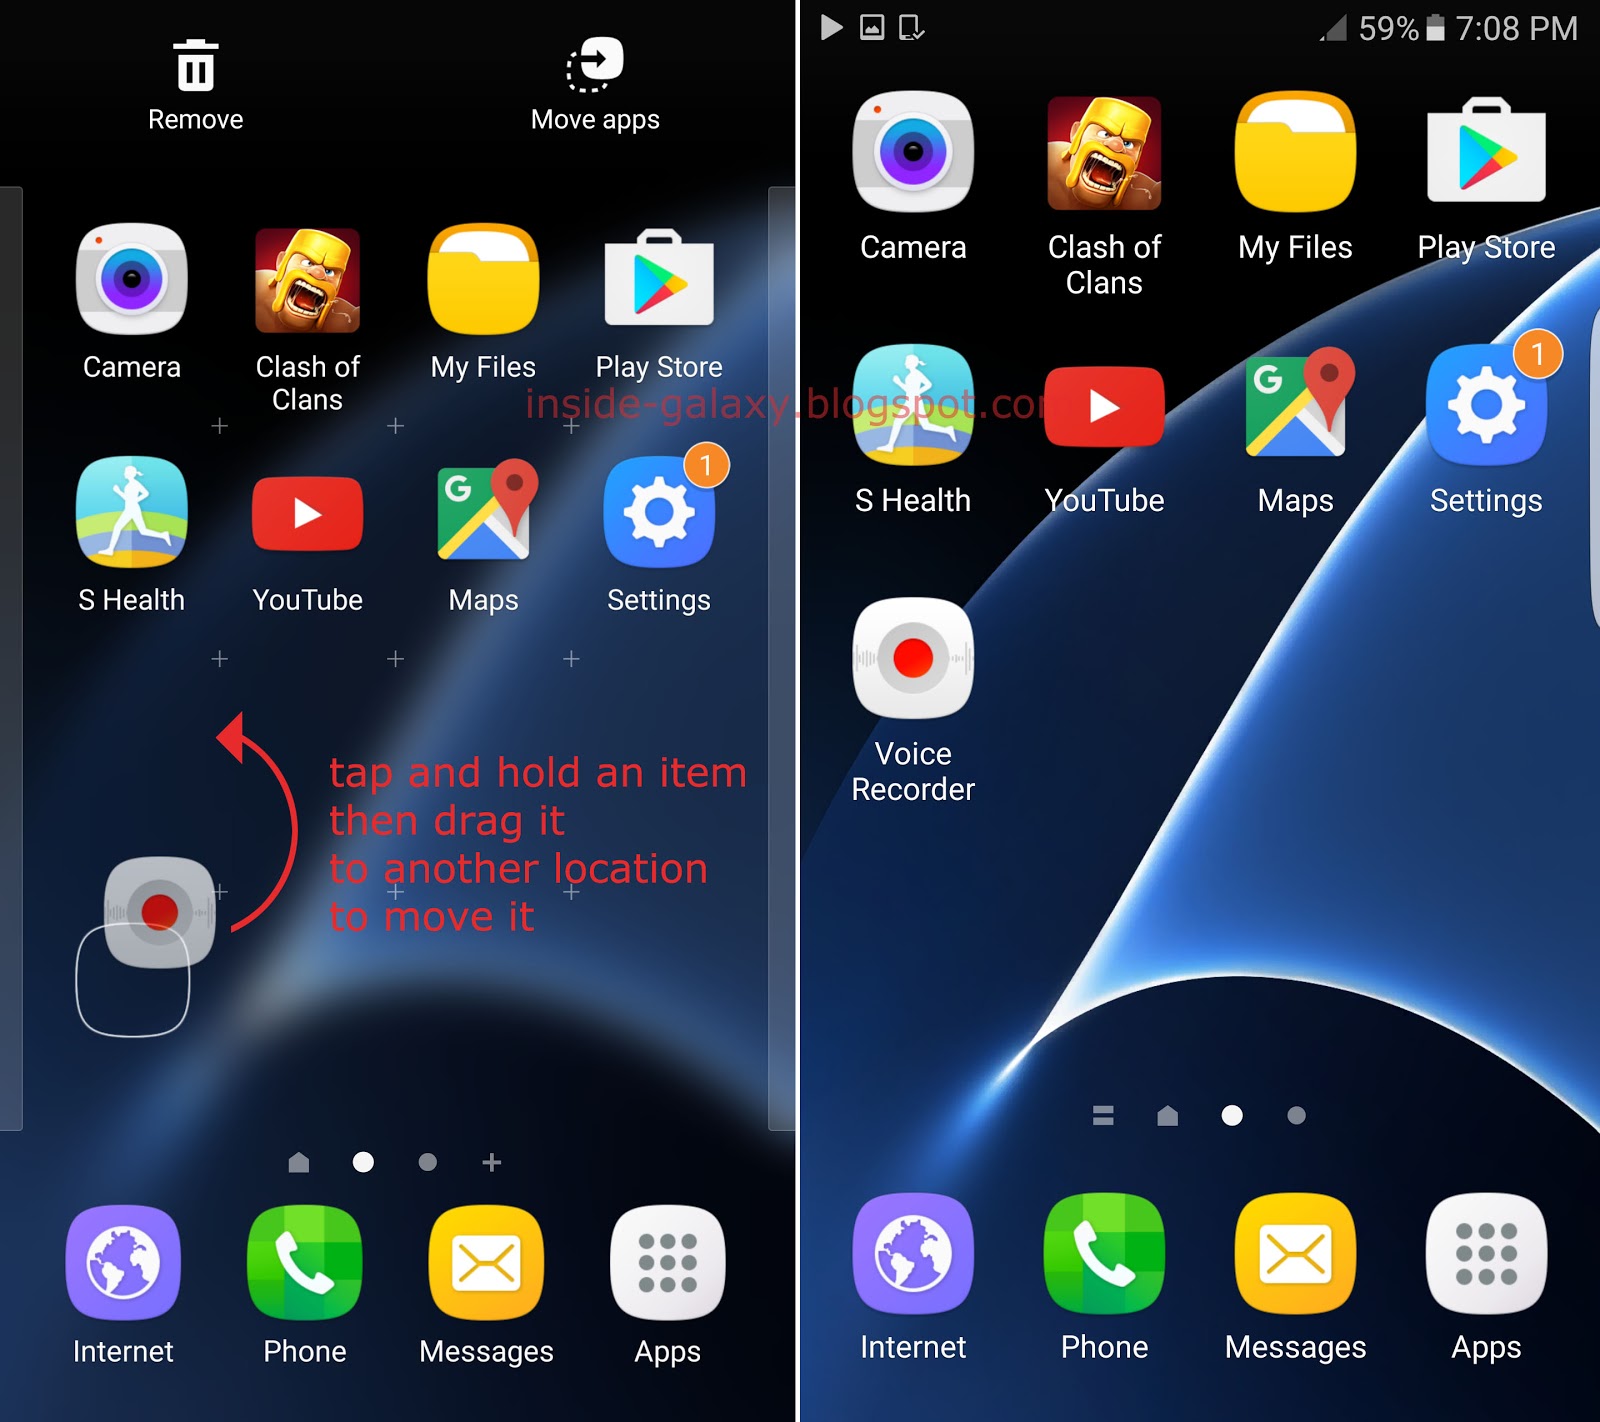 Inside Galaxy: Samsung Galaxy S7 Edge: How to Move Items in Home Screen in  Android 6.0.1 Marshmallow